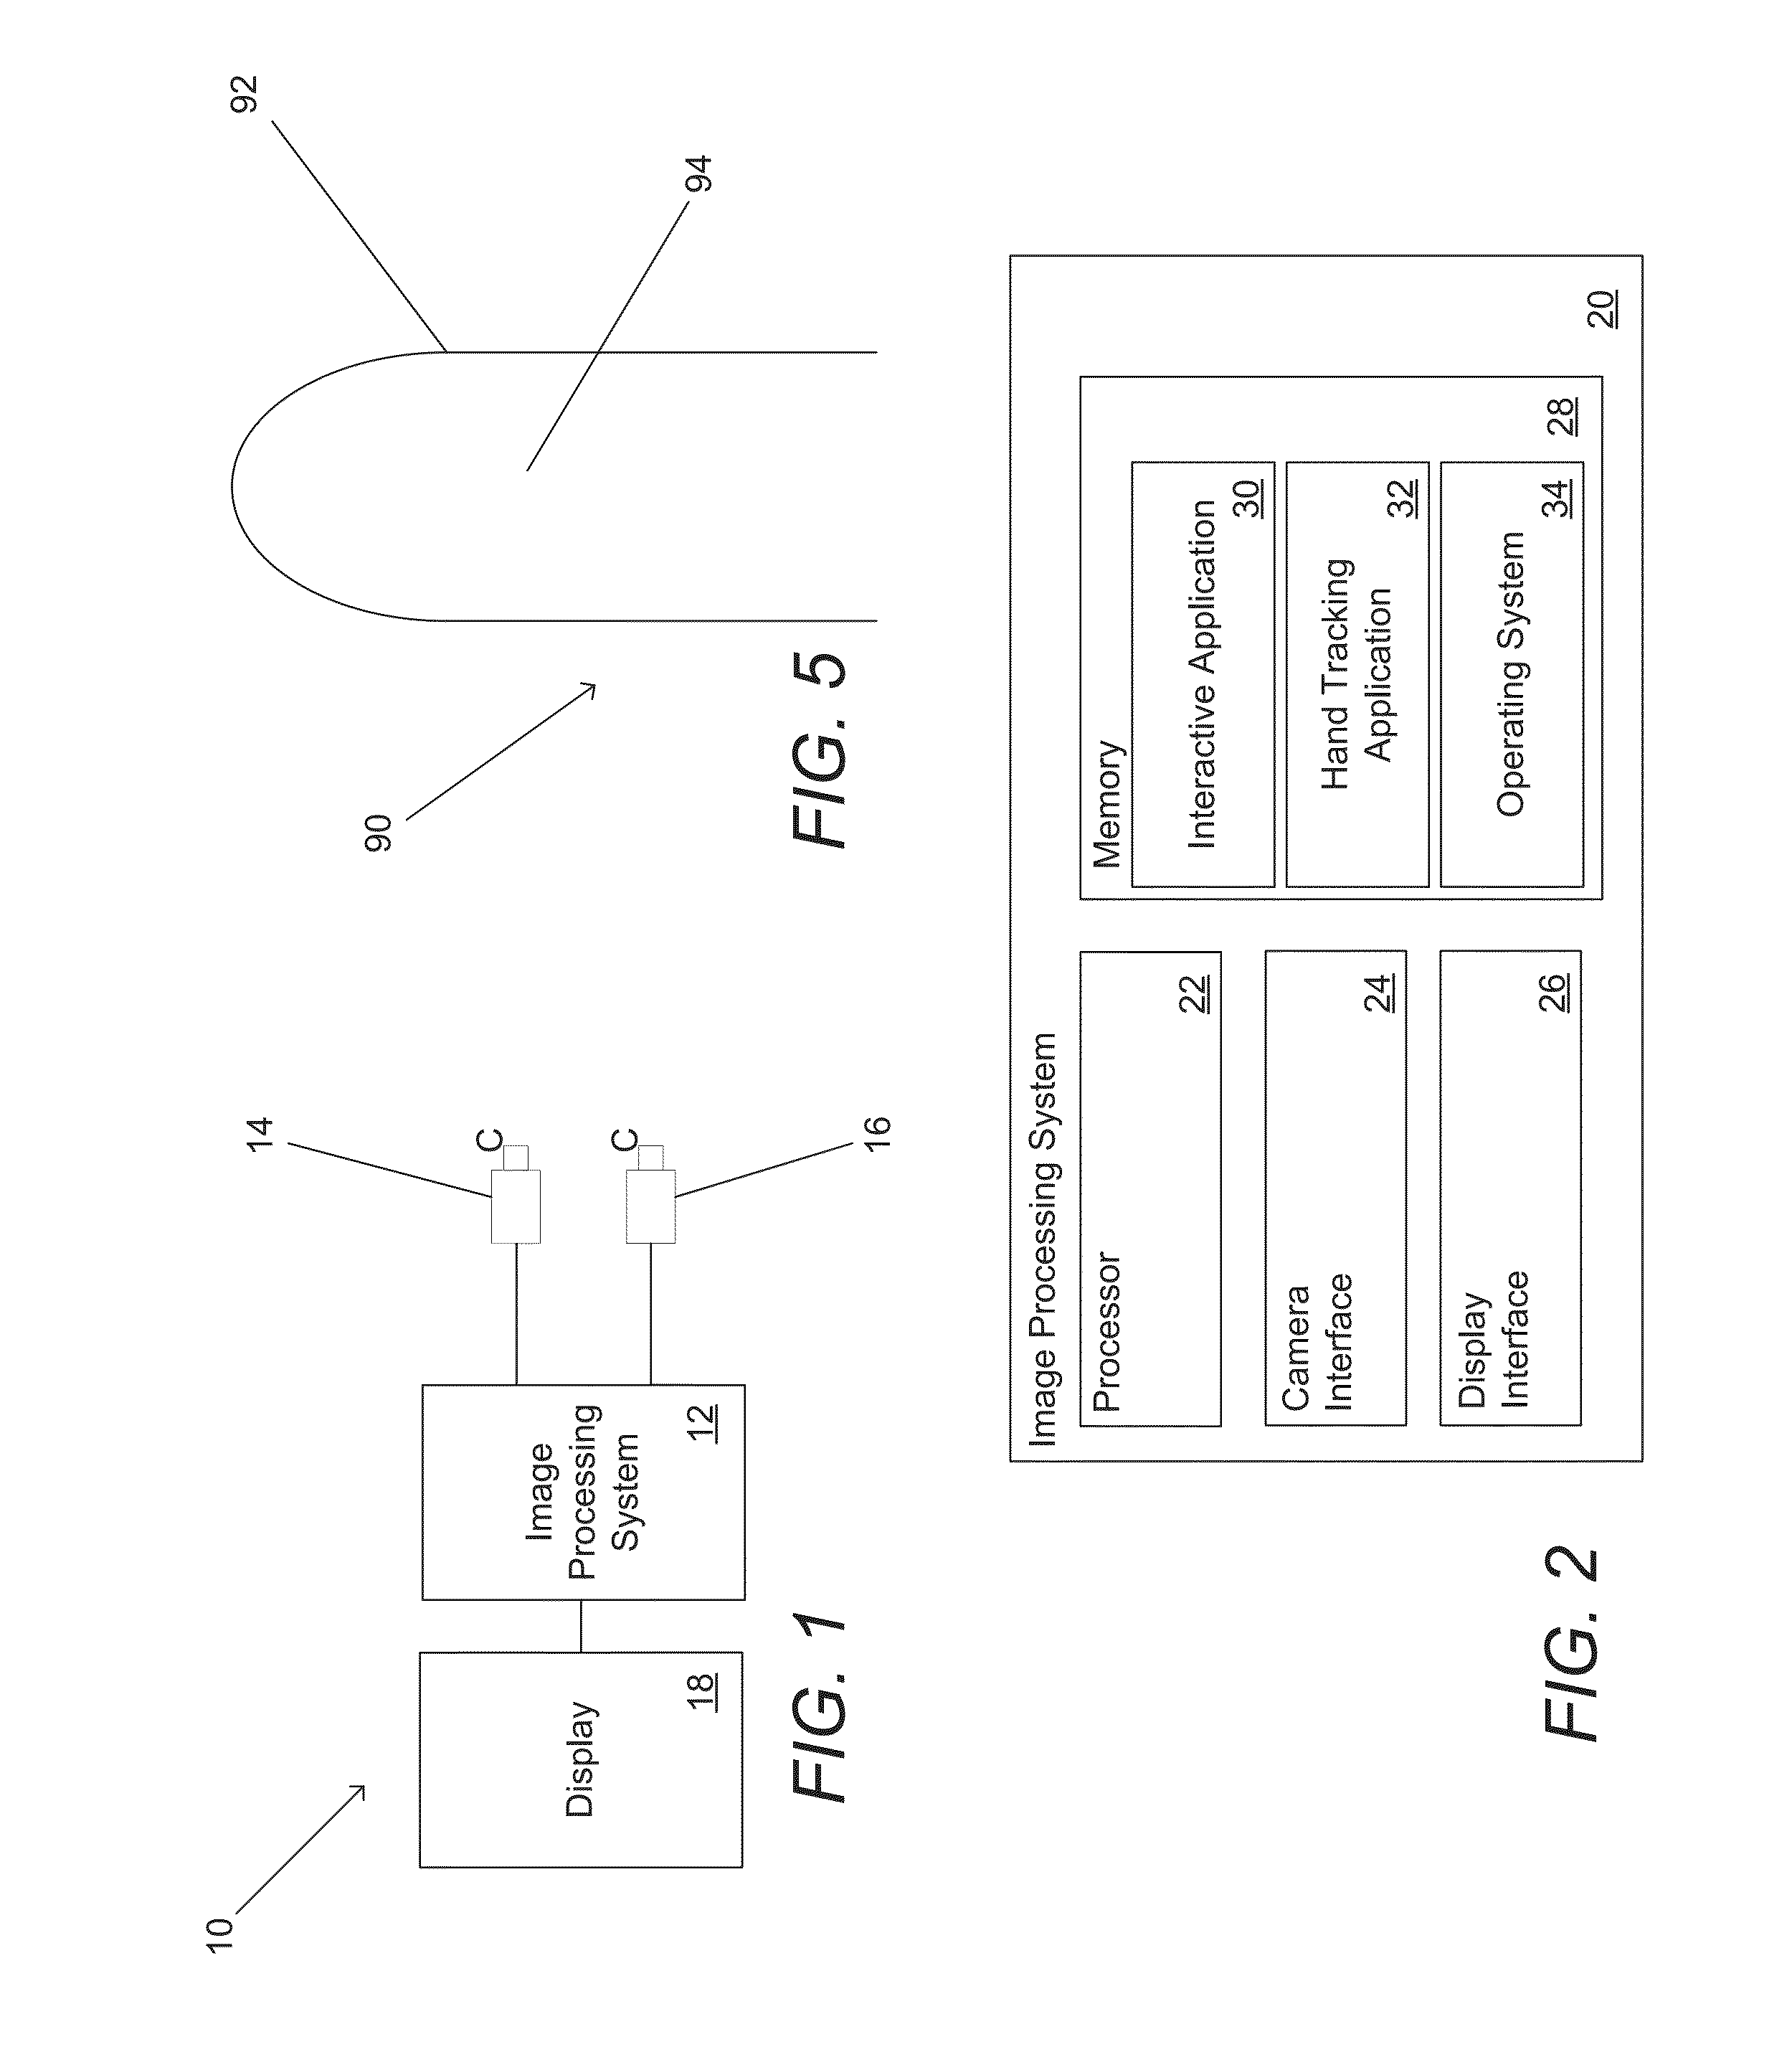 Systems and methods for initializing motion tracking of human hands